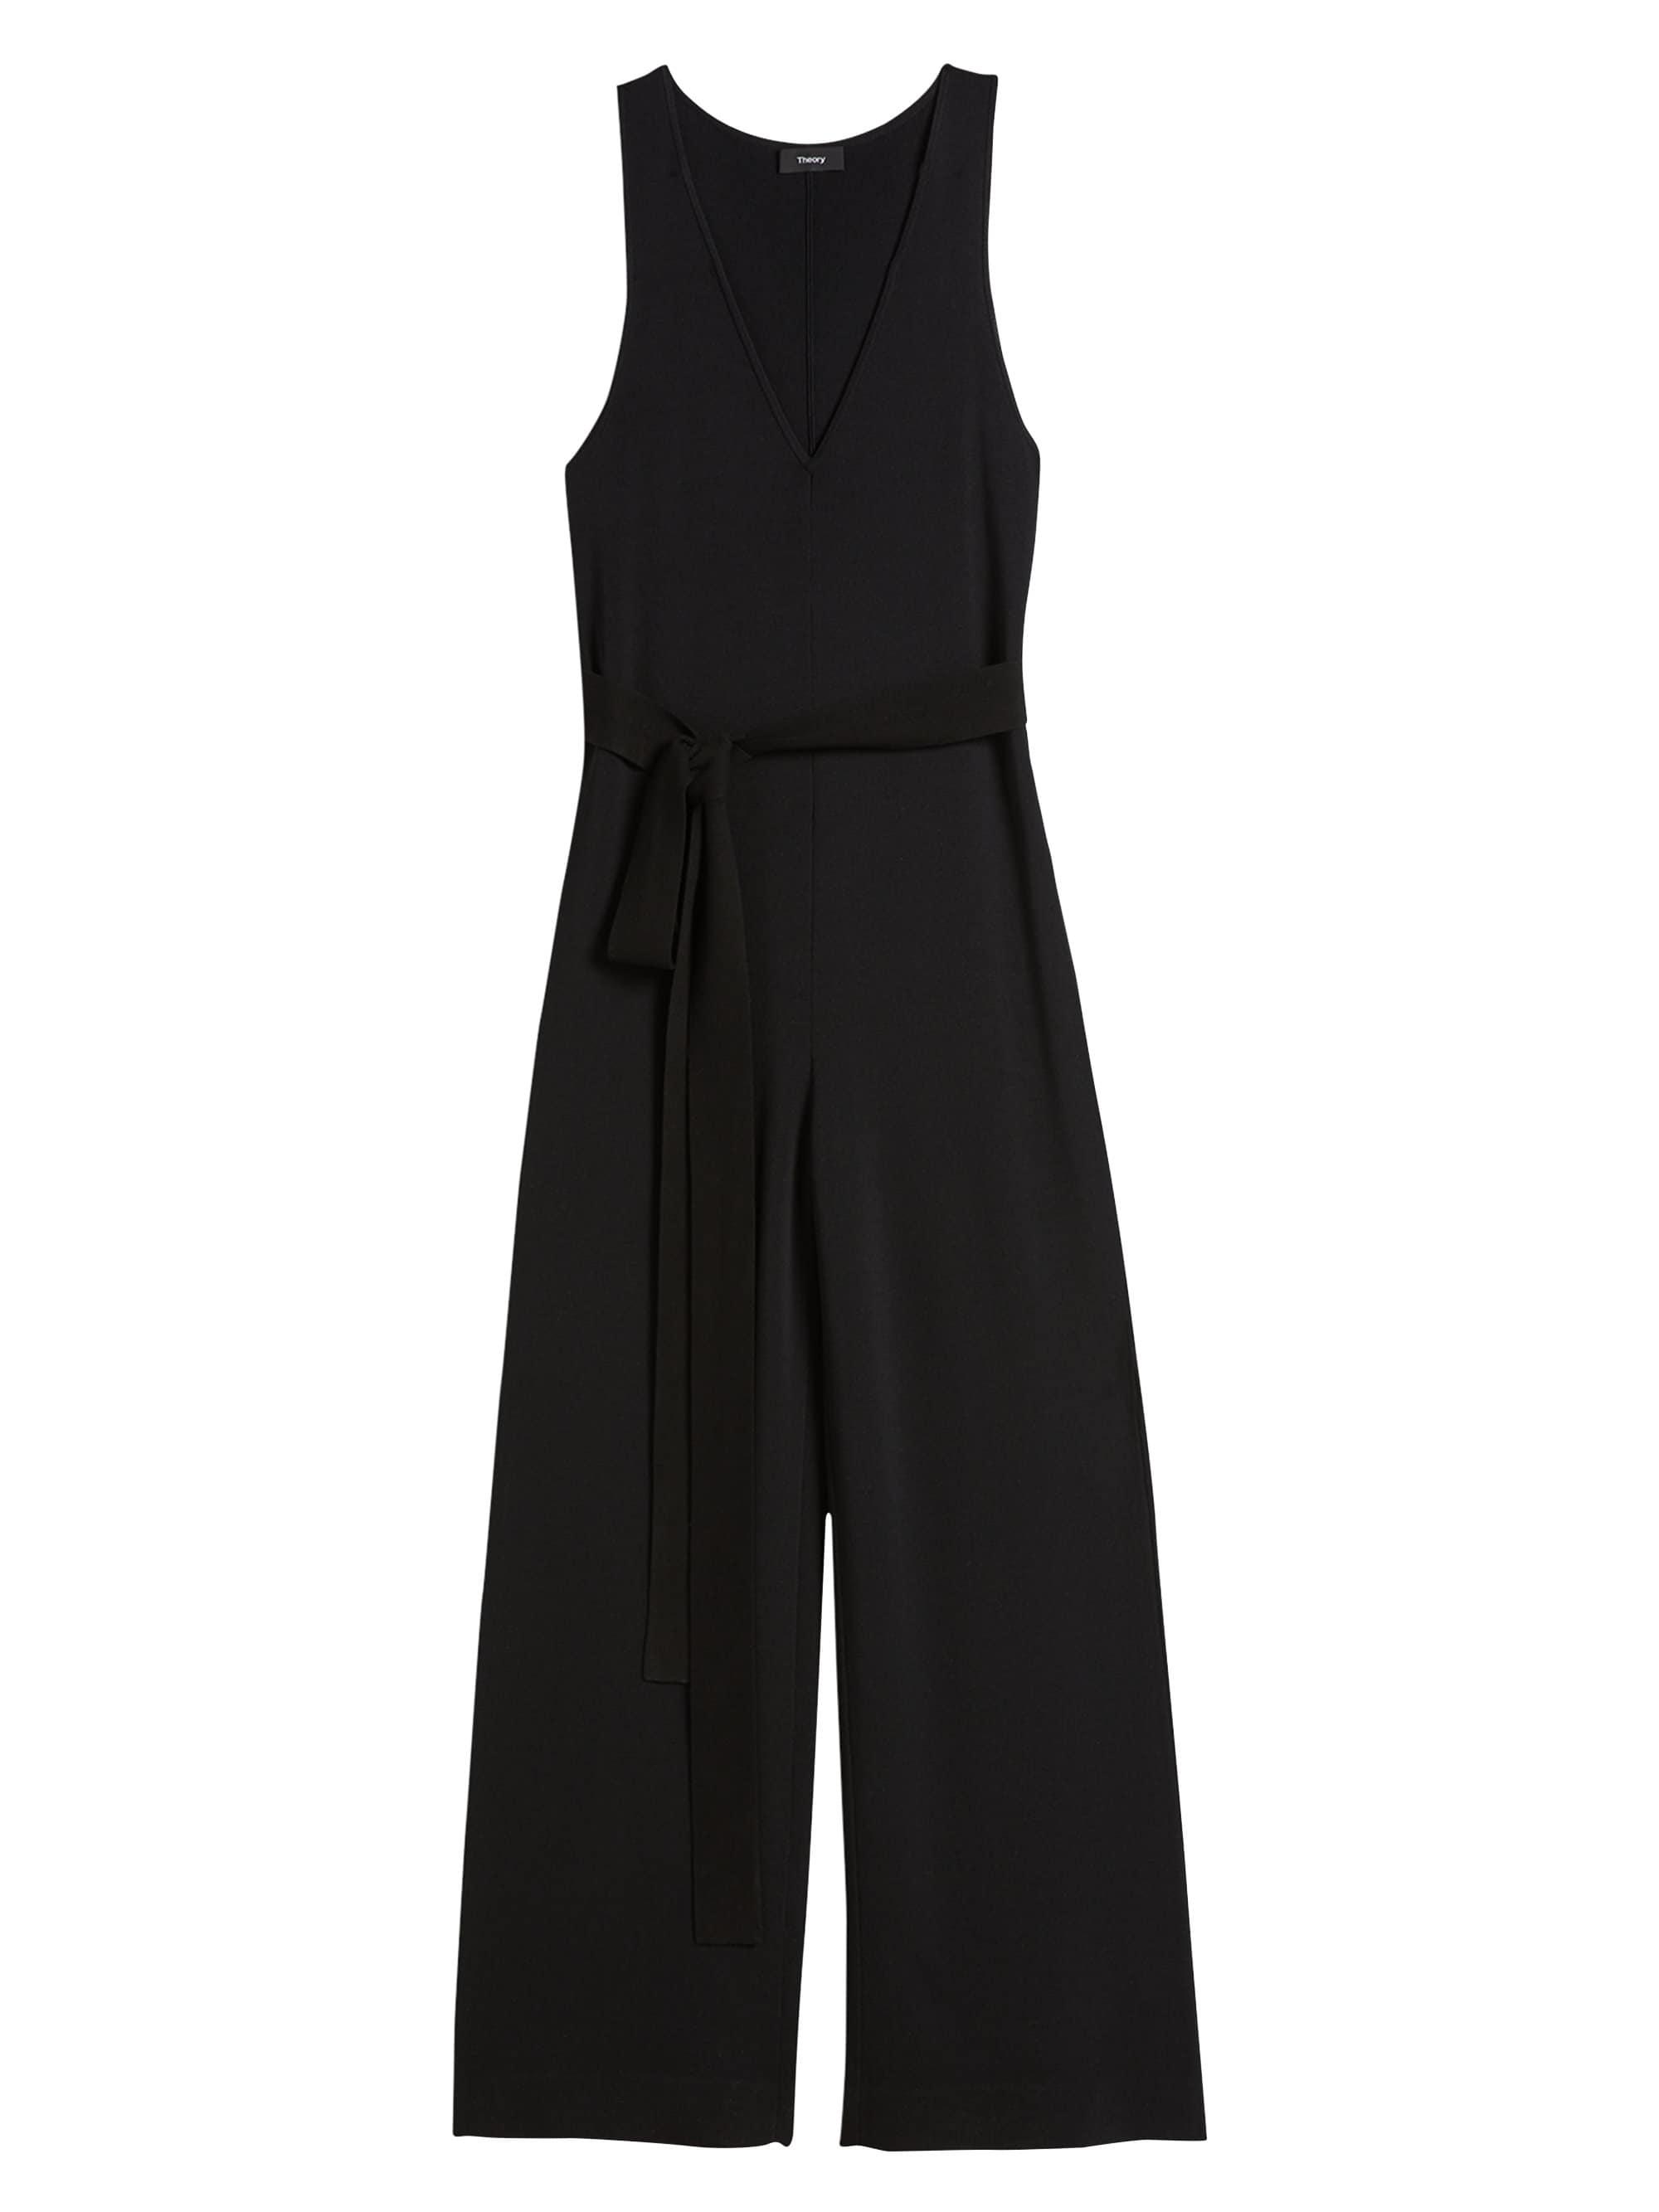 Theory V-neck Knit Jumpsuit in Black - Lyst